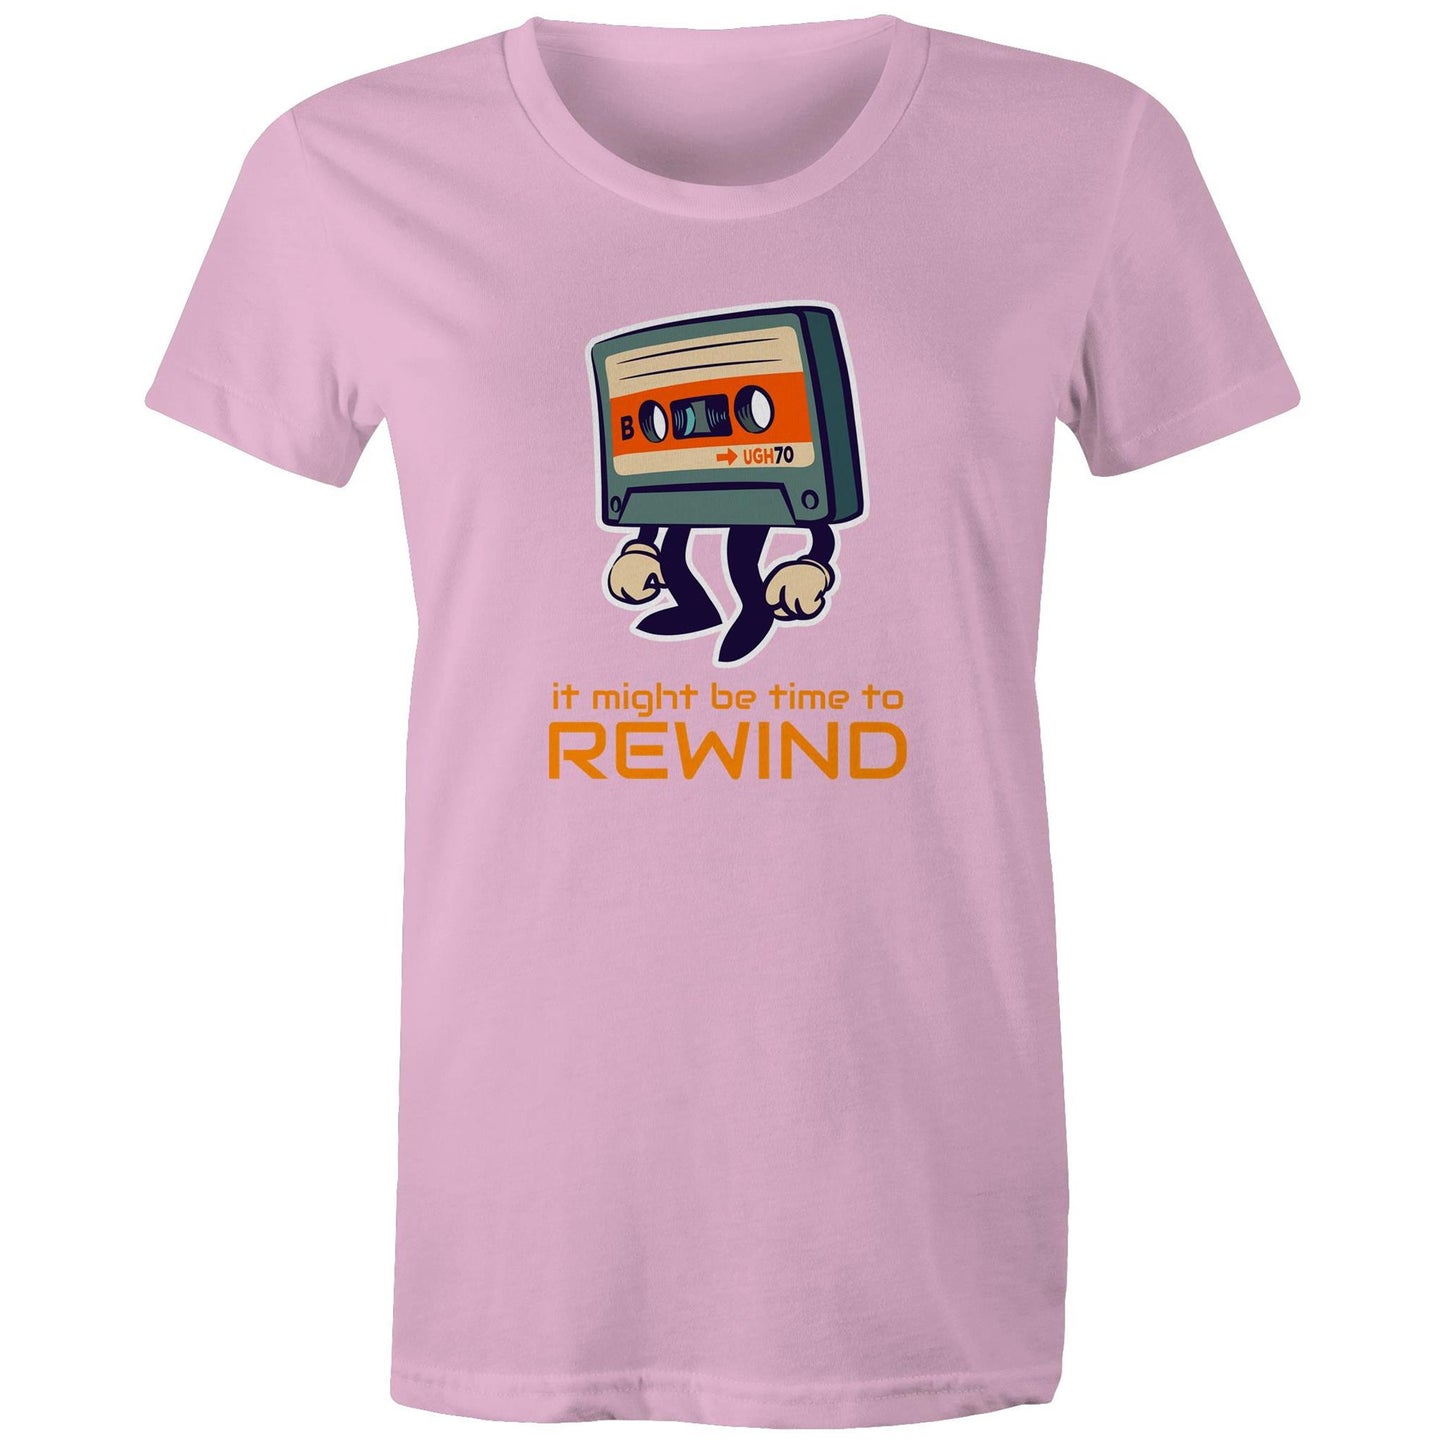 It Might Be Time To Rewind - Womens T-shirt Pink Womens T-shirt Music Retro